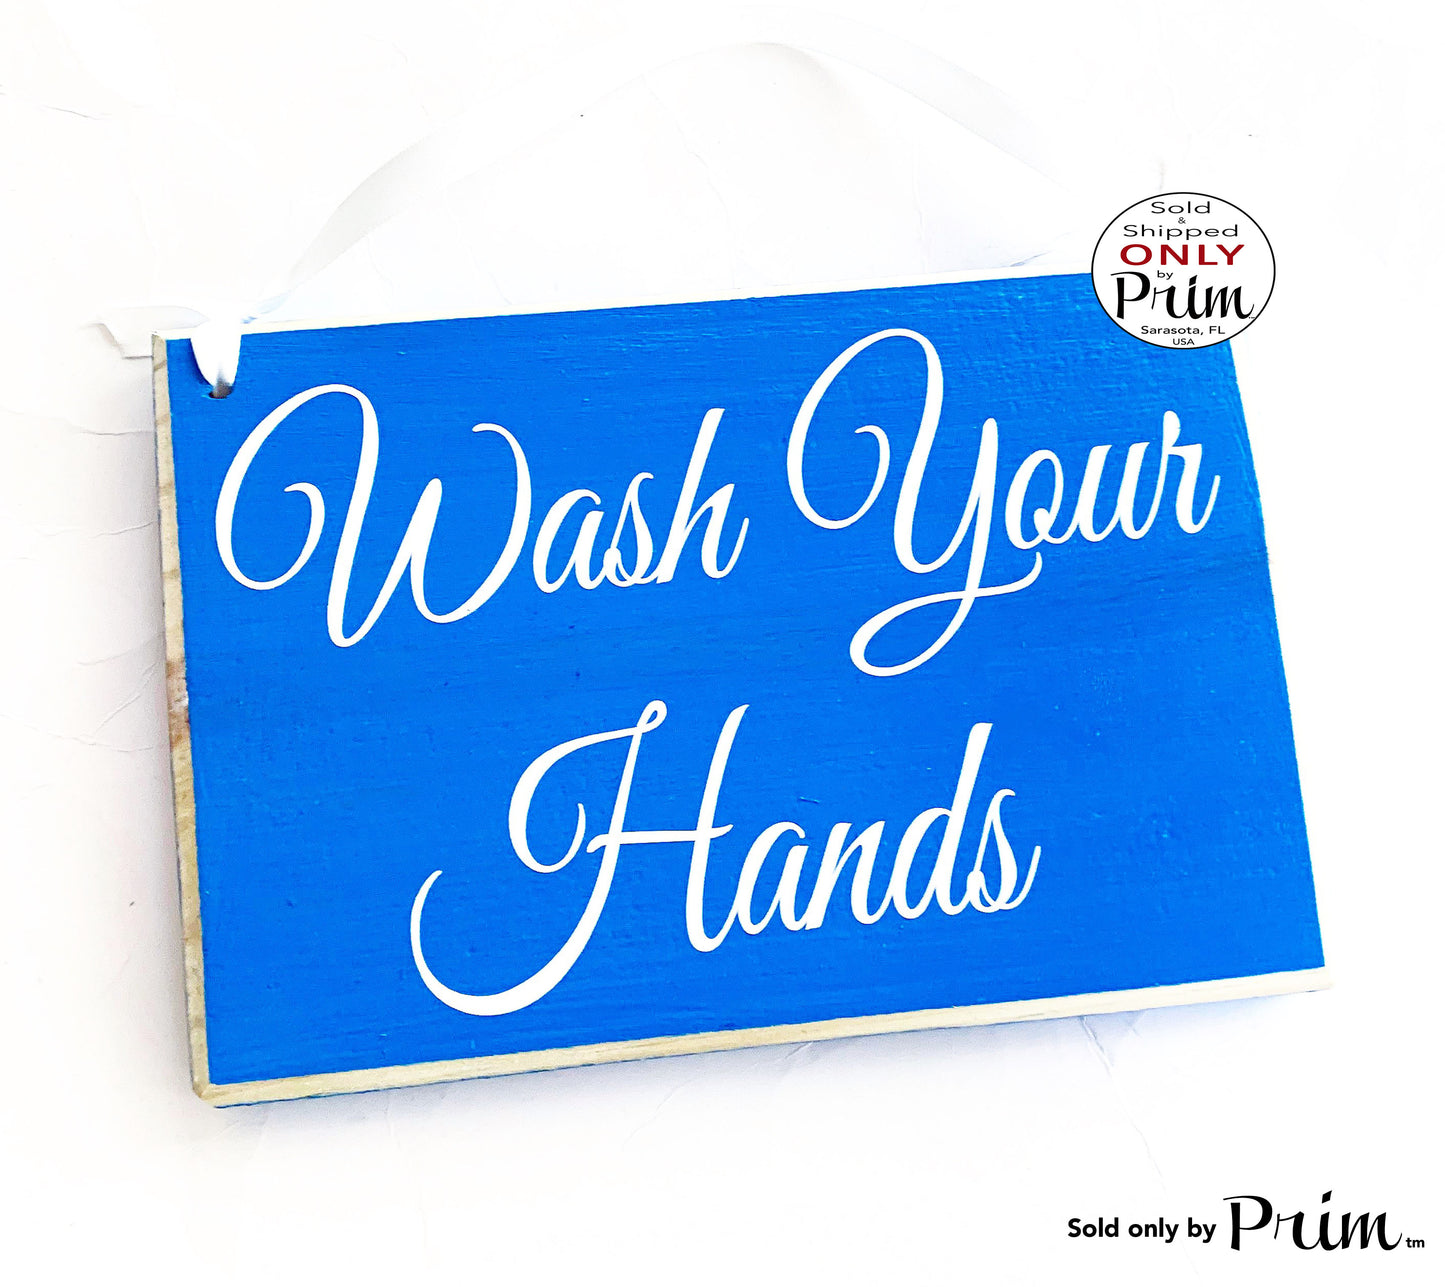 8x6 Wash Your Hands Custom Wood Sign | Business Office Home Bathroom Restroom Spa Boutique Hygiene Mandatory Please  Wood Sign